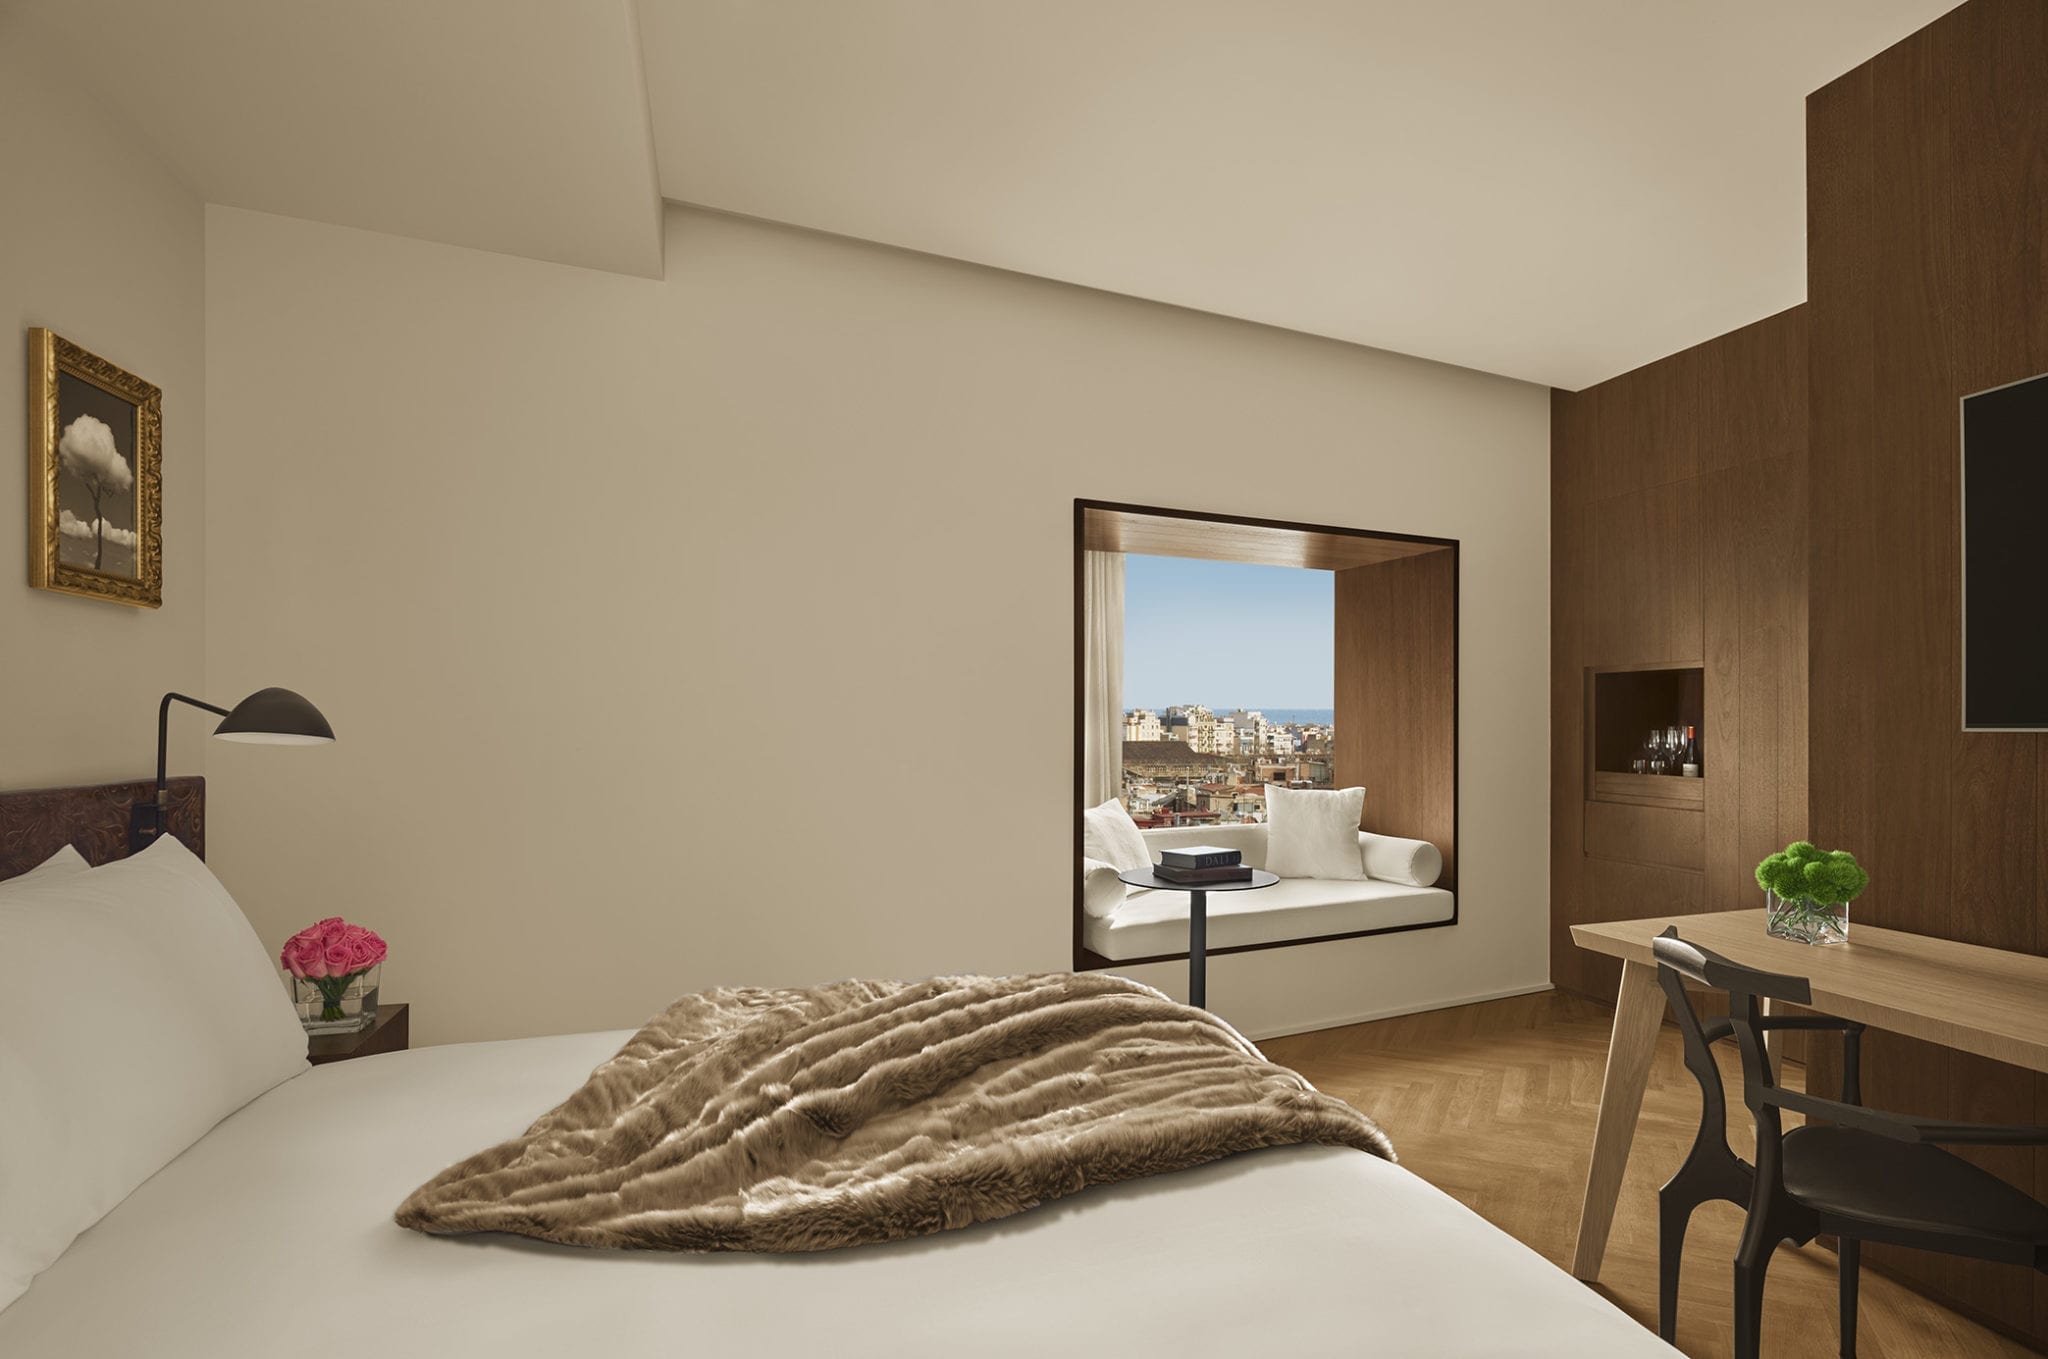 The Barcelona Edition Luxury Hotel Rooms In Barcelona Spain